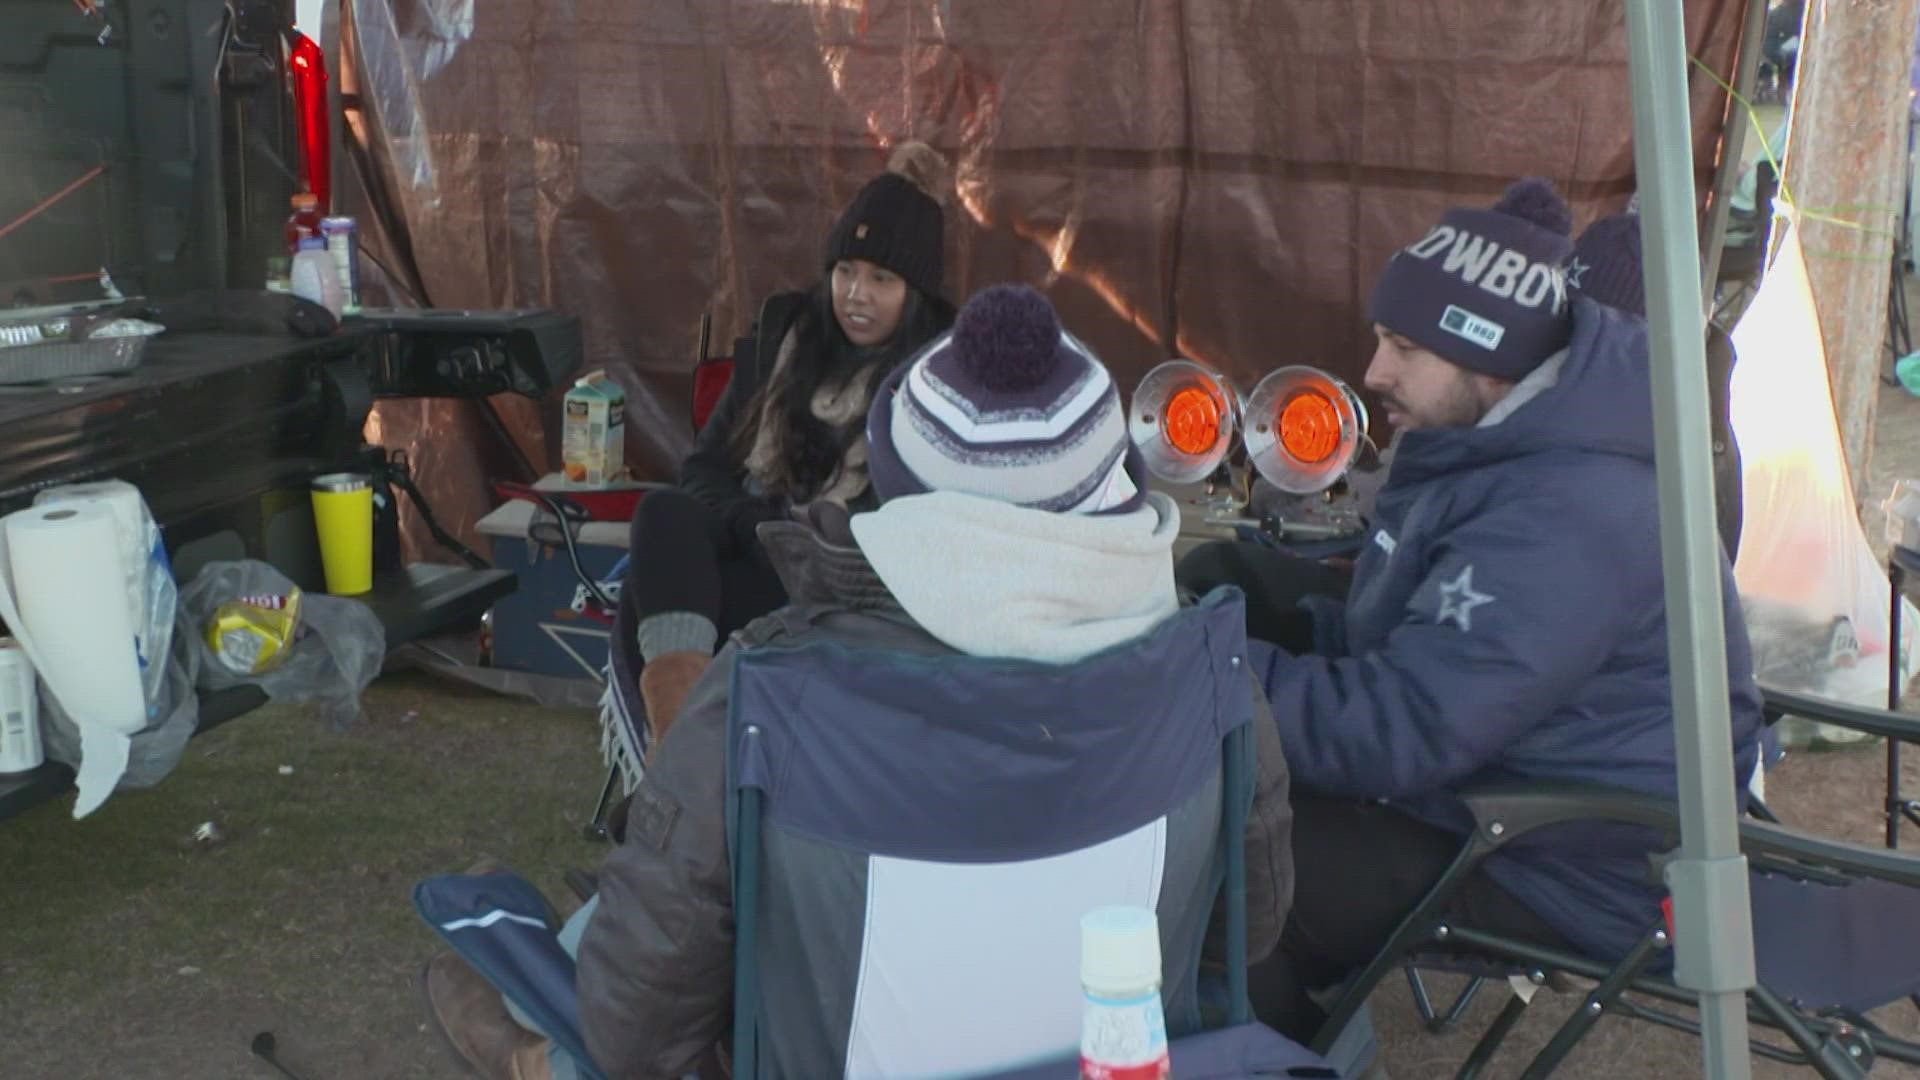 Dallas Cowboys fans faced a single-digit wind chill during Sunday morning tailgating.